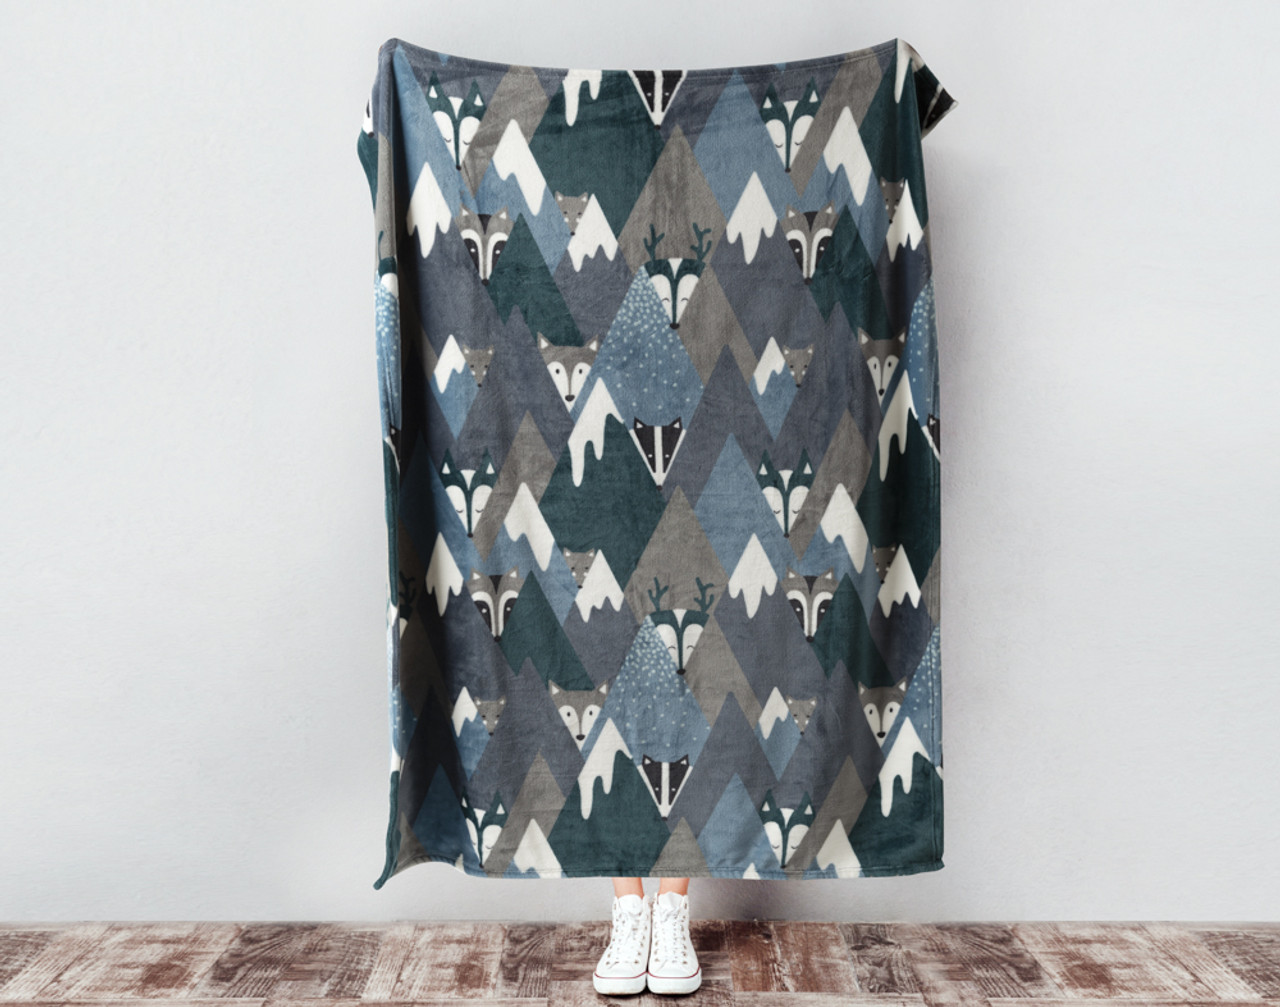 Our Kid's Fleece Velveteen Throw in Mountain Animals being held against a wall with triangular critter faces and a diamond mountain pattern.